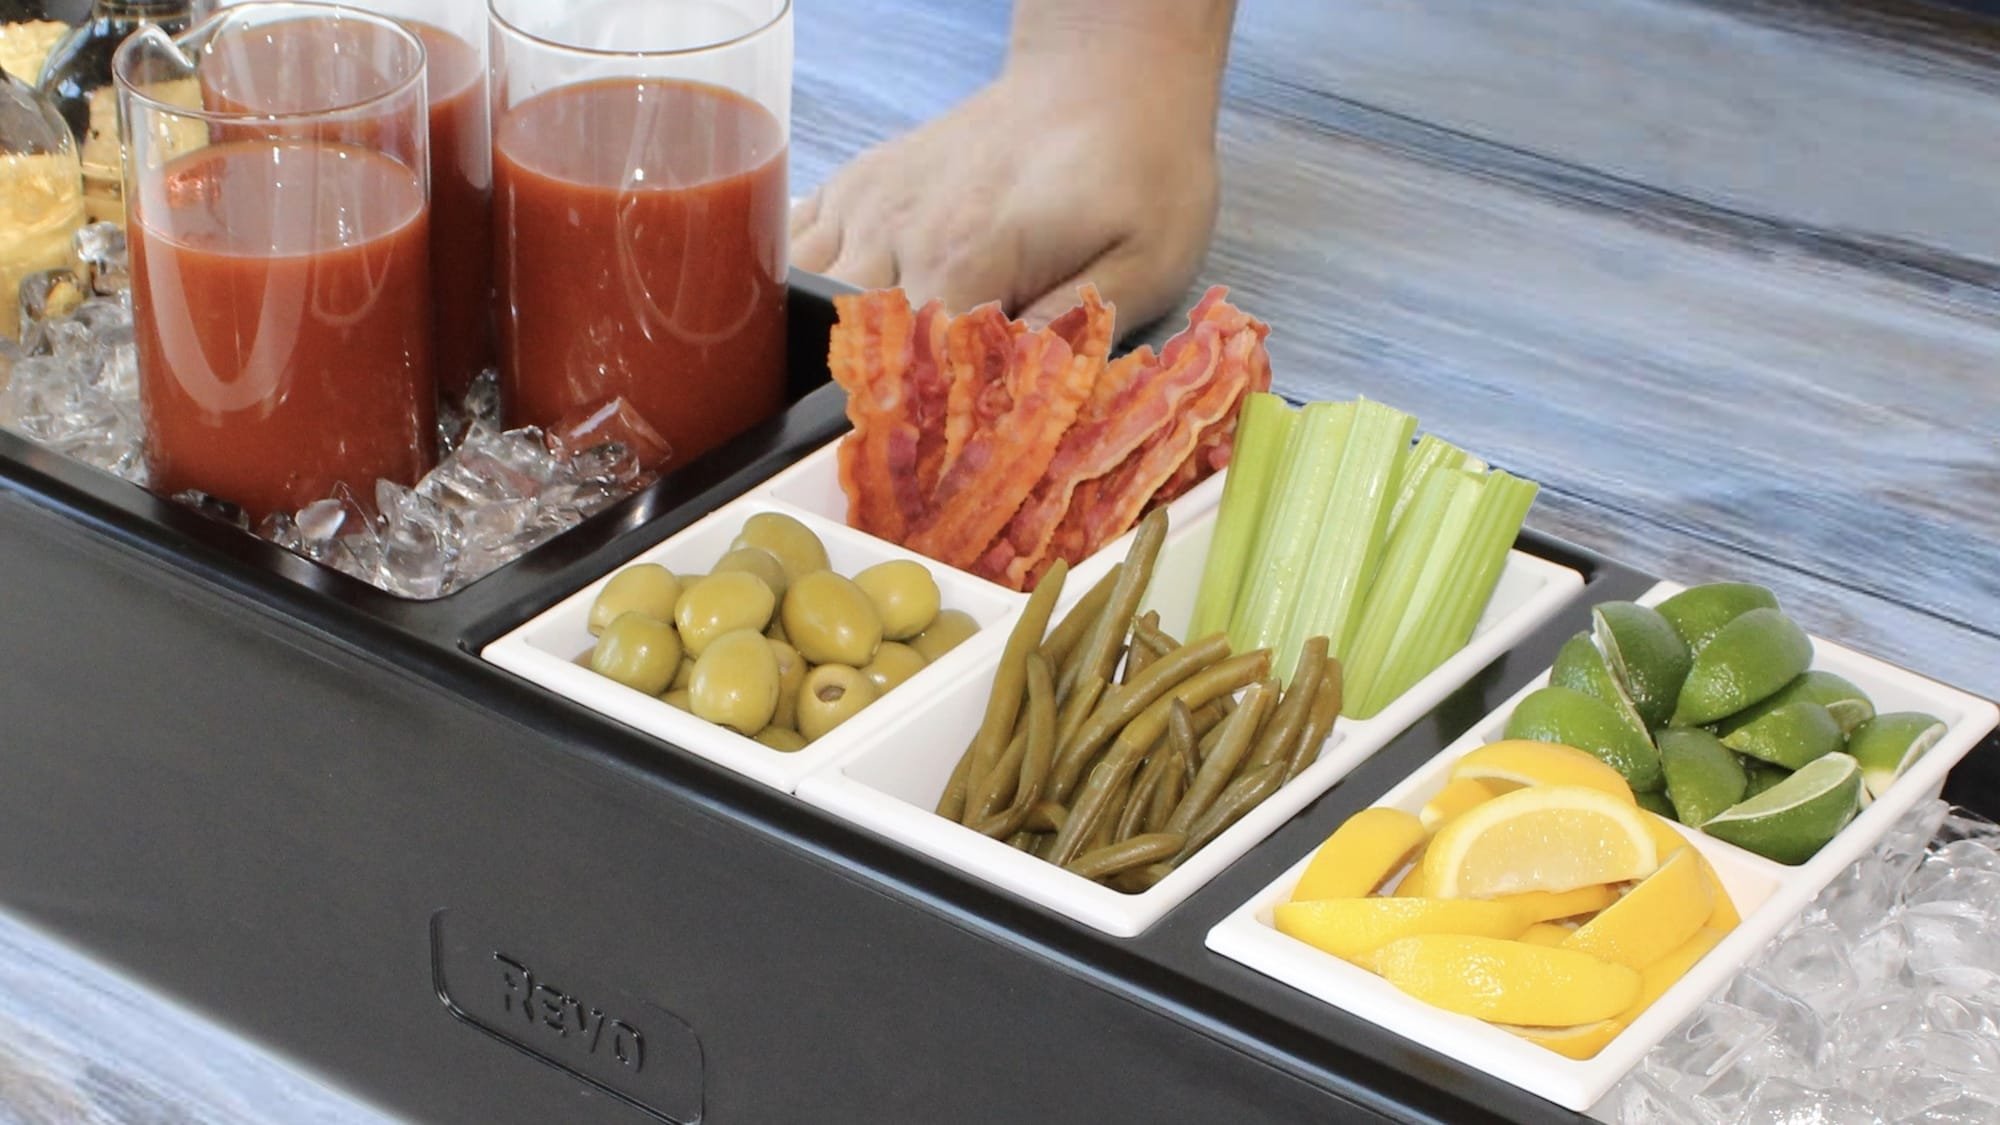 REVO Coolers party beverage tub collection makes entertaining easy and fun